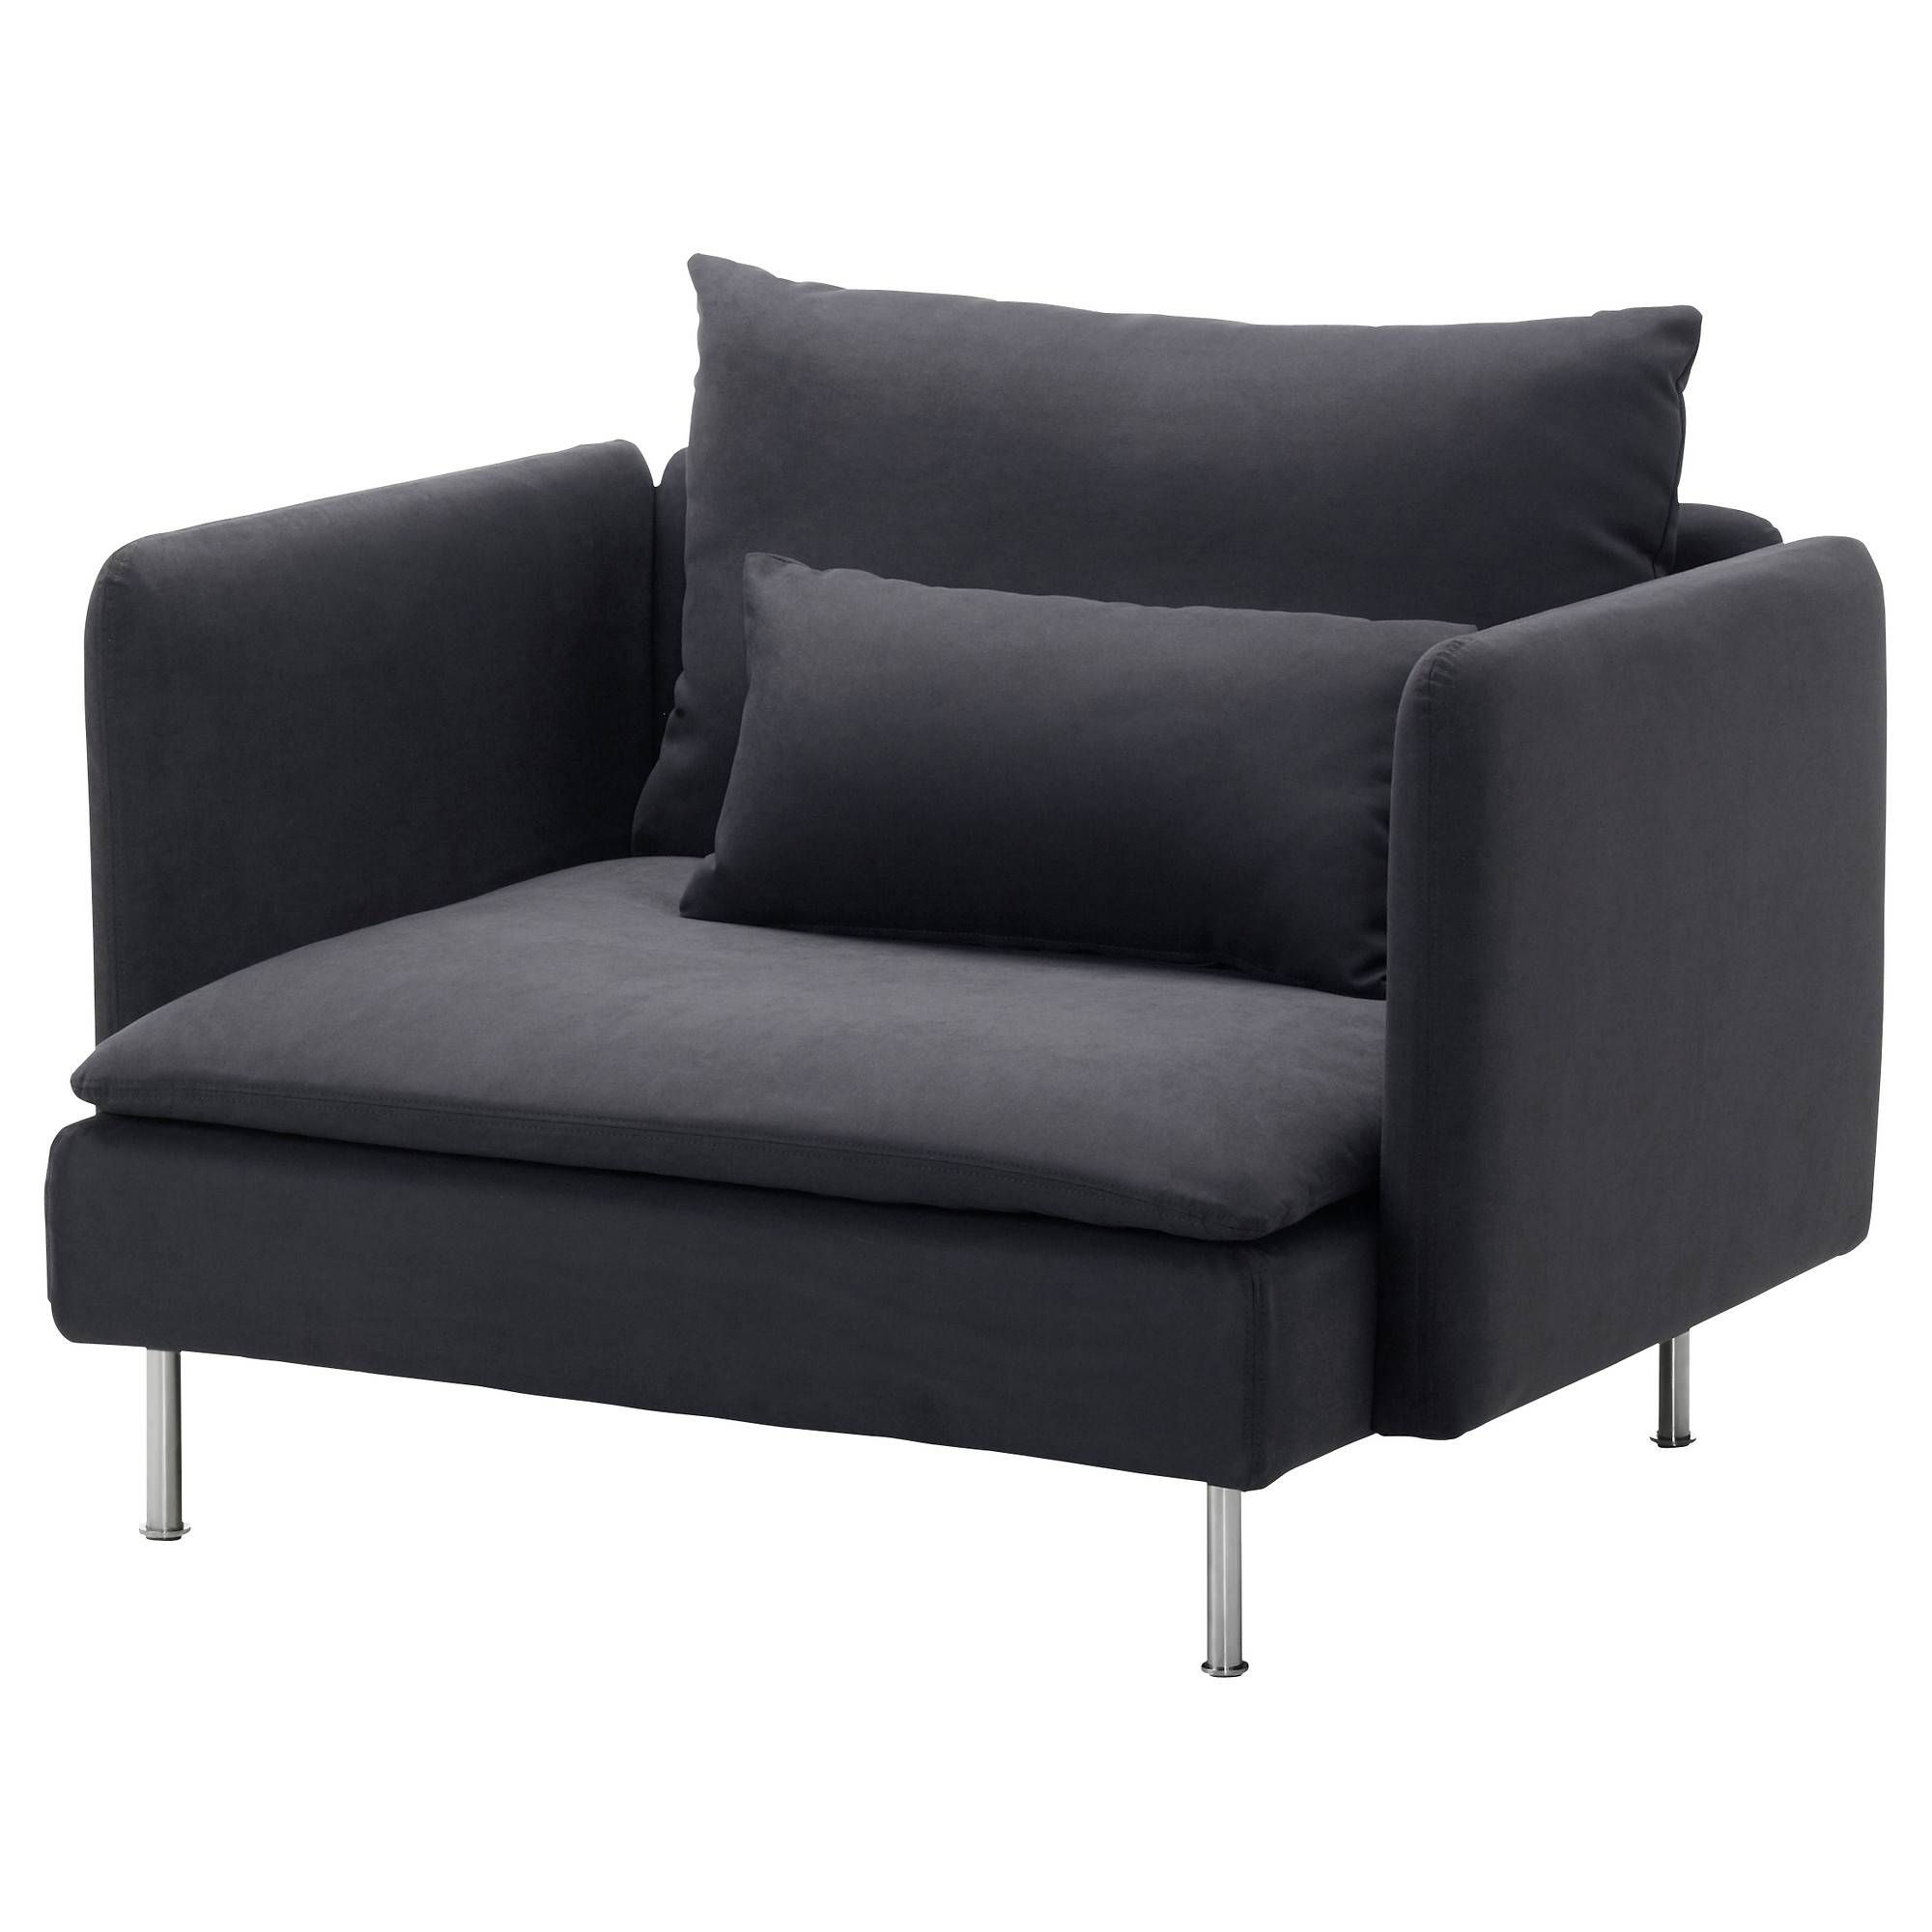 Sectional Sofas & Couches – Ikea With Regard To Manstad Sofa Bed Ikea (View 14 of 25)